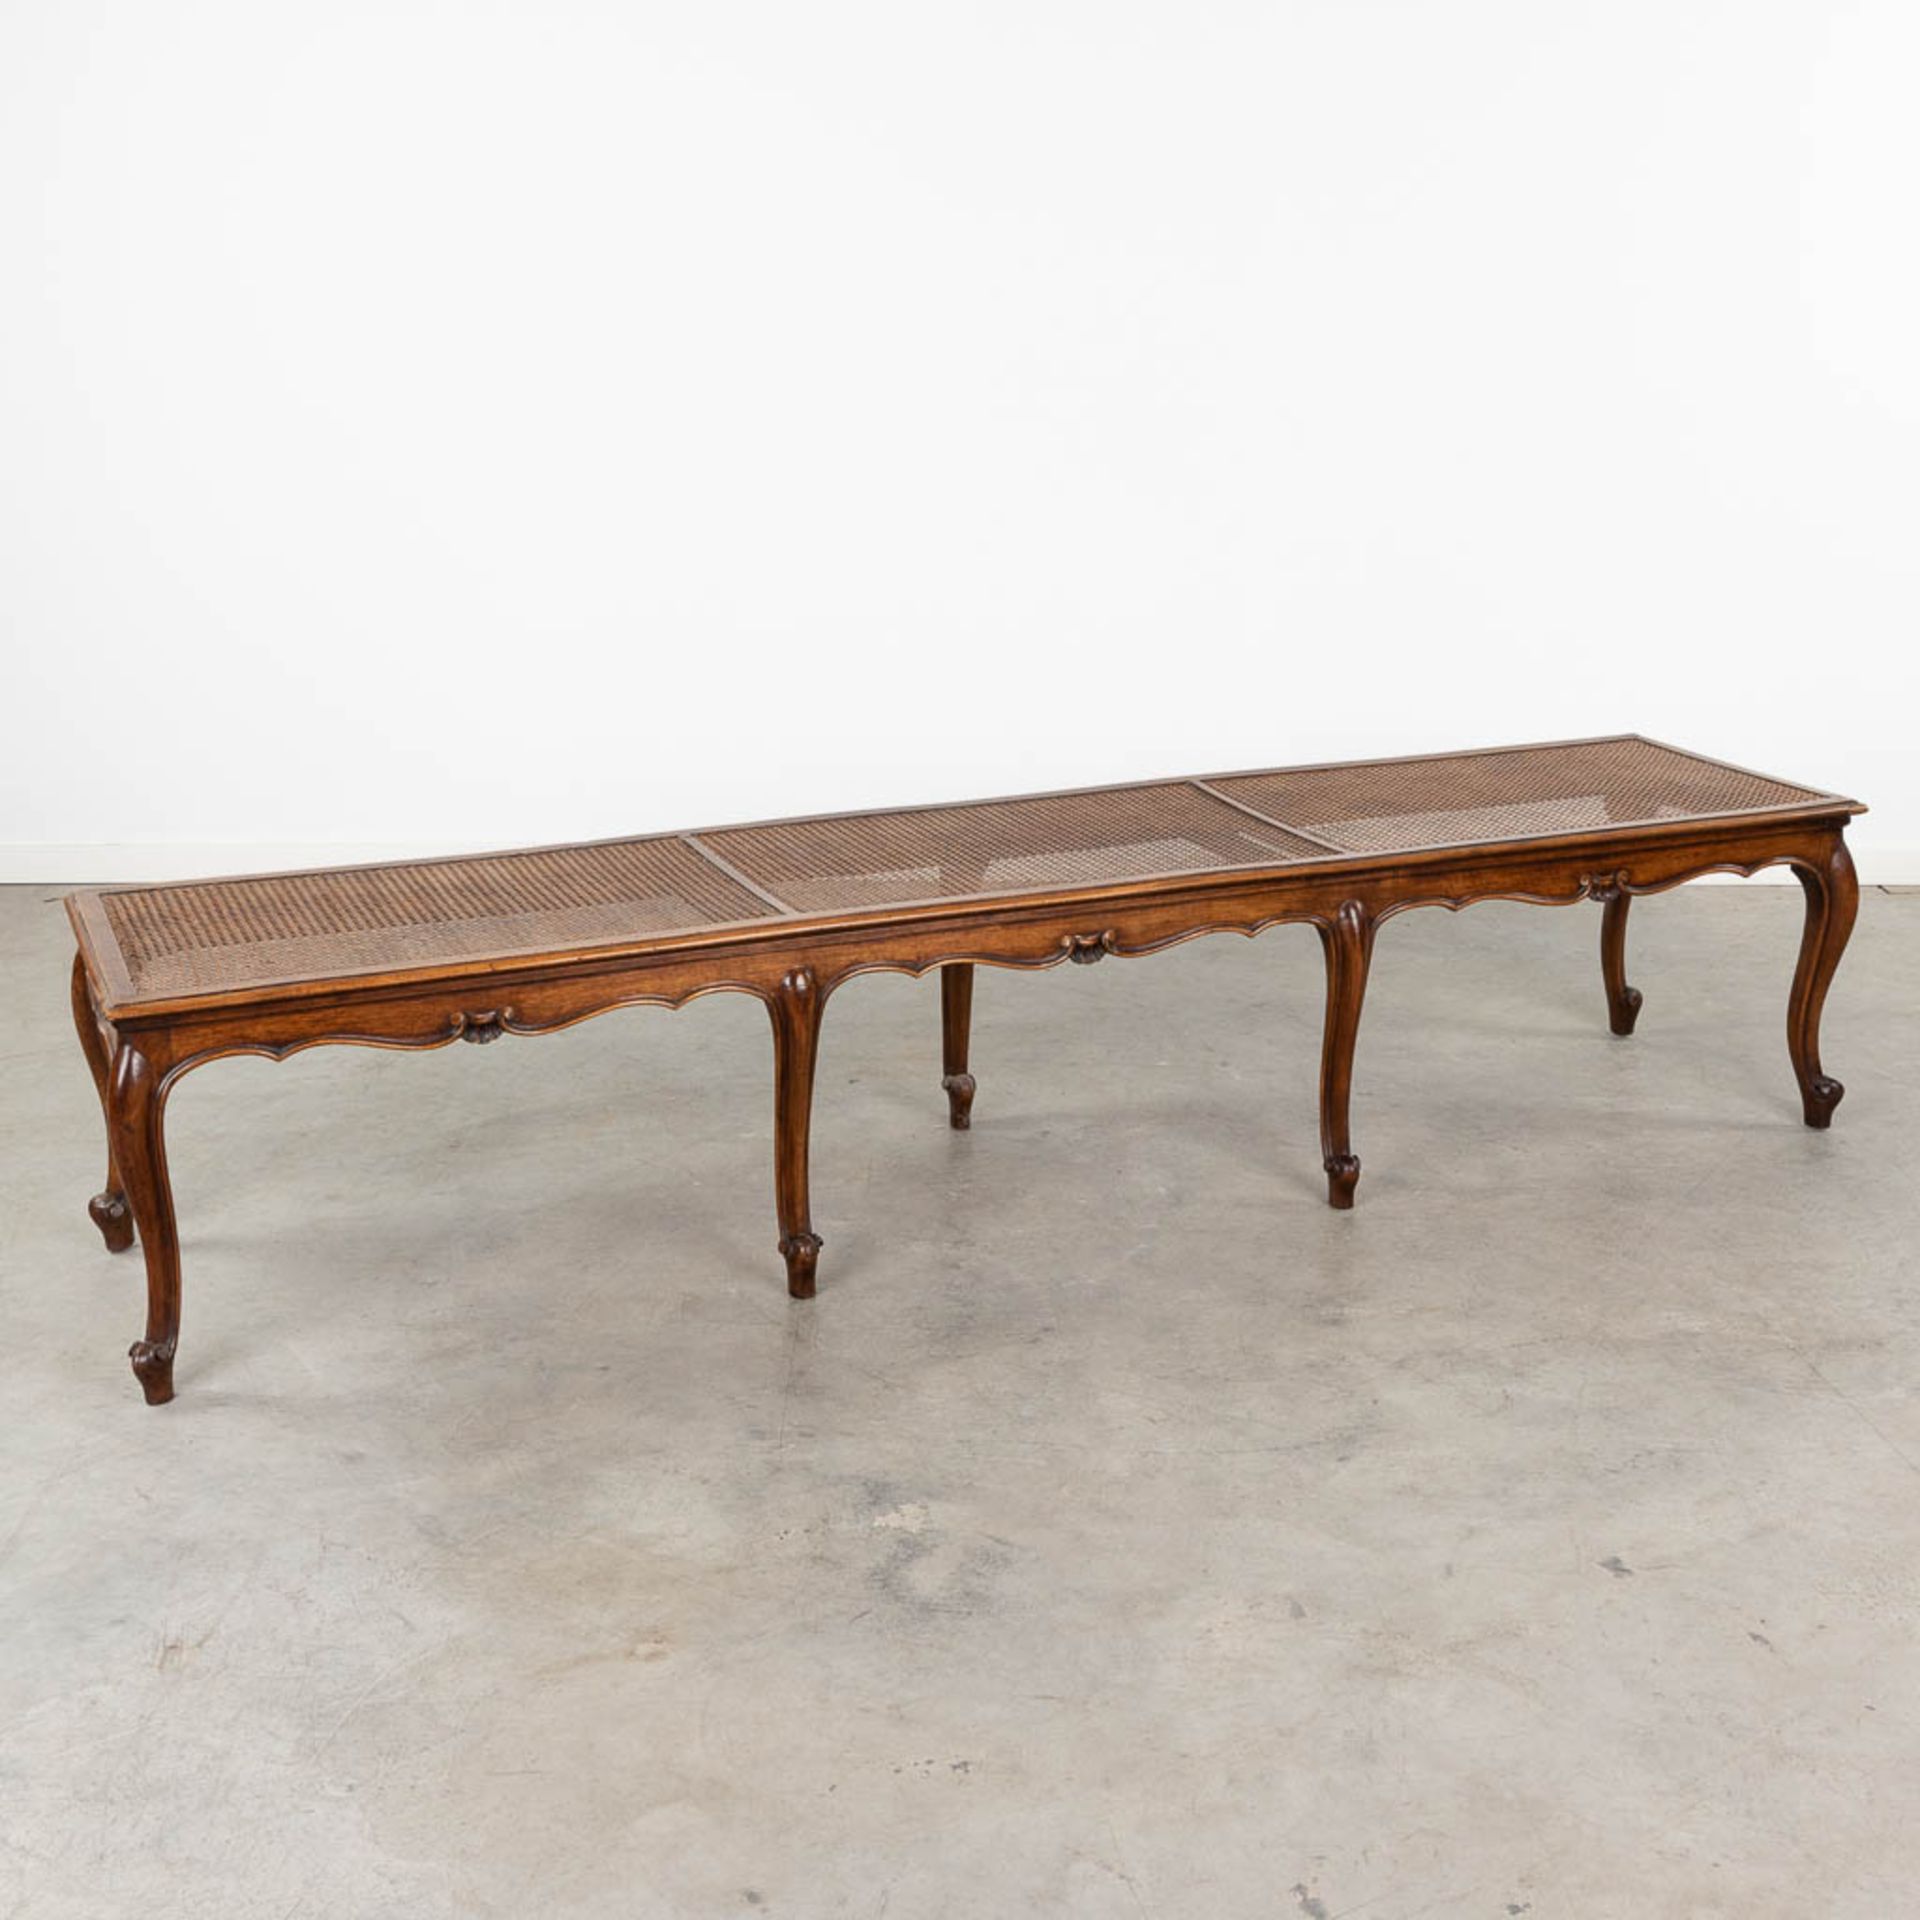 A long bench made of sculptured wood in Louis XV style finished with caning. (L:48 x W:218 x H:44 c